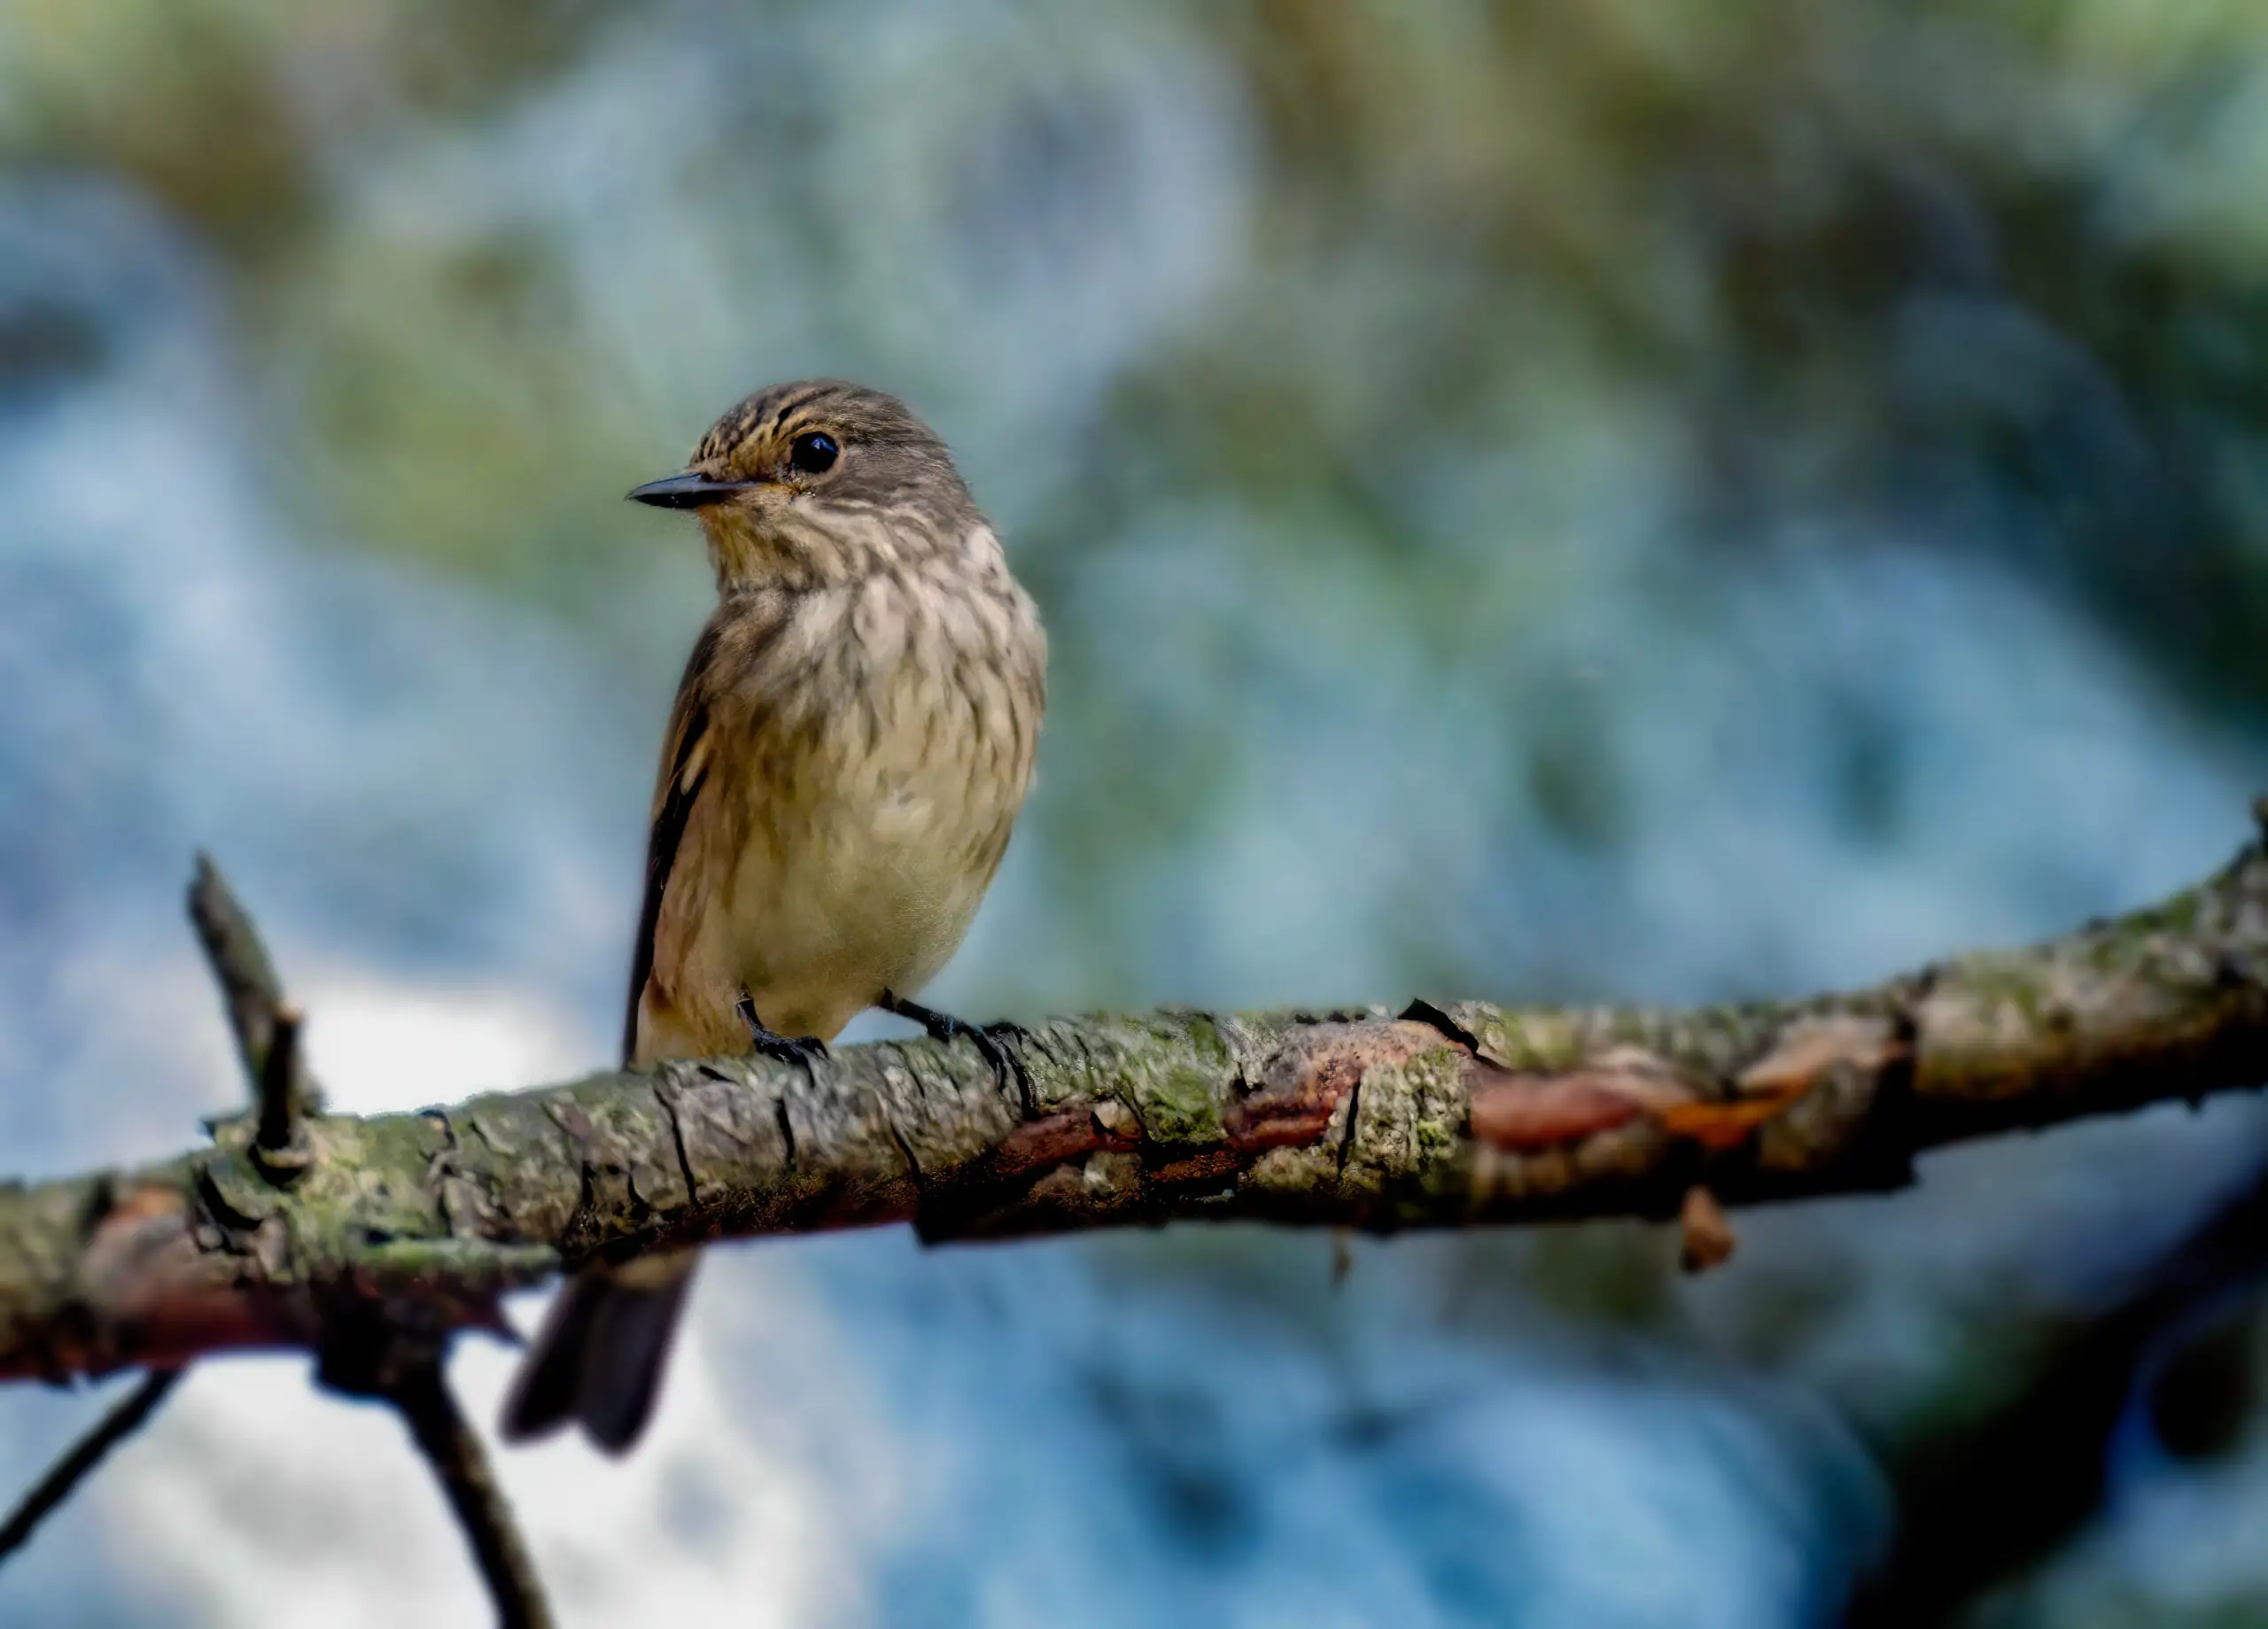 The gray Flycatcher (Empidonax wrightii) perched on a tree branch